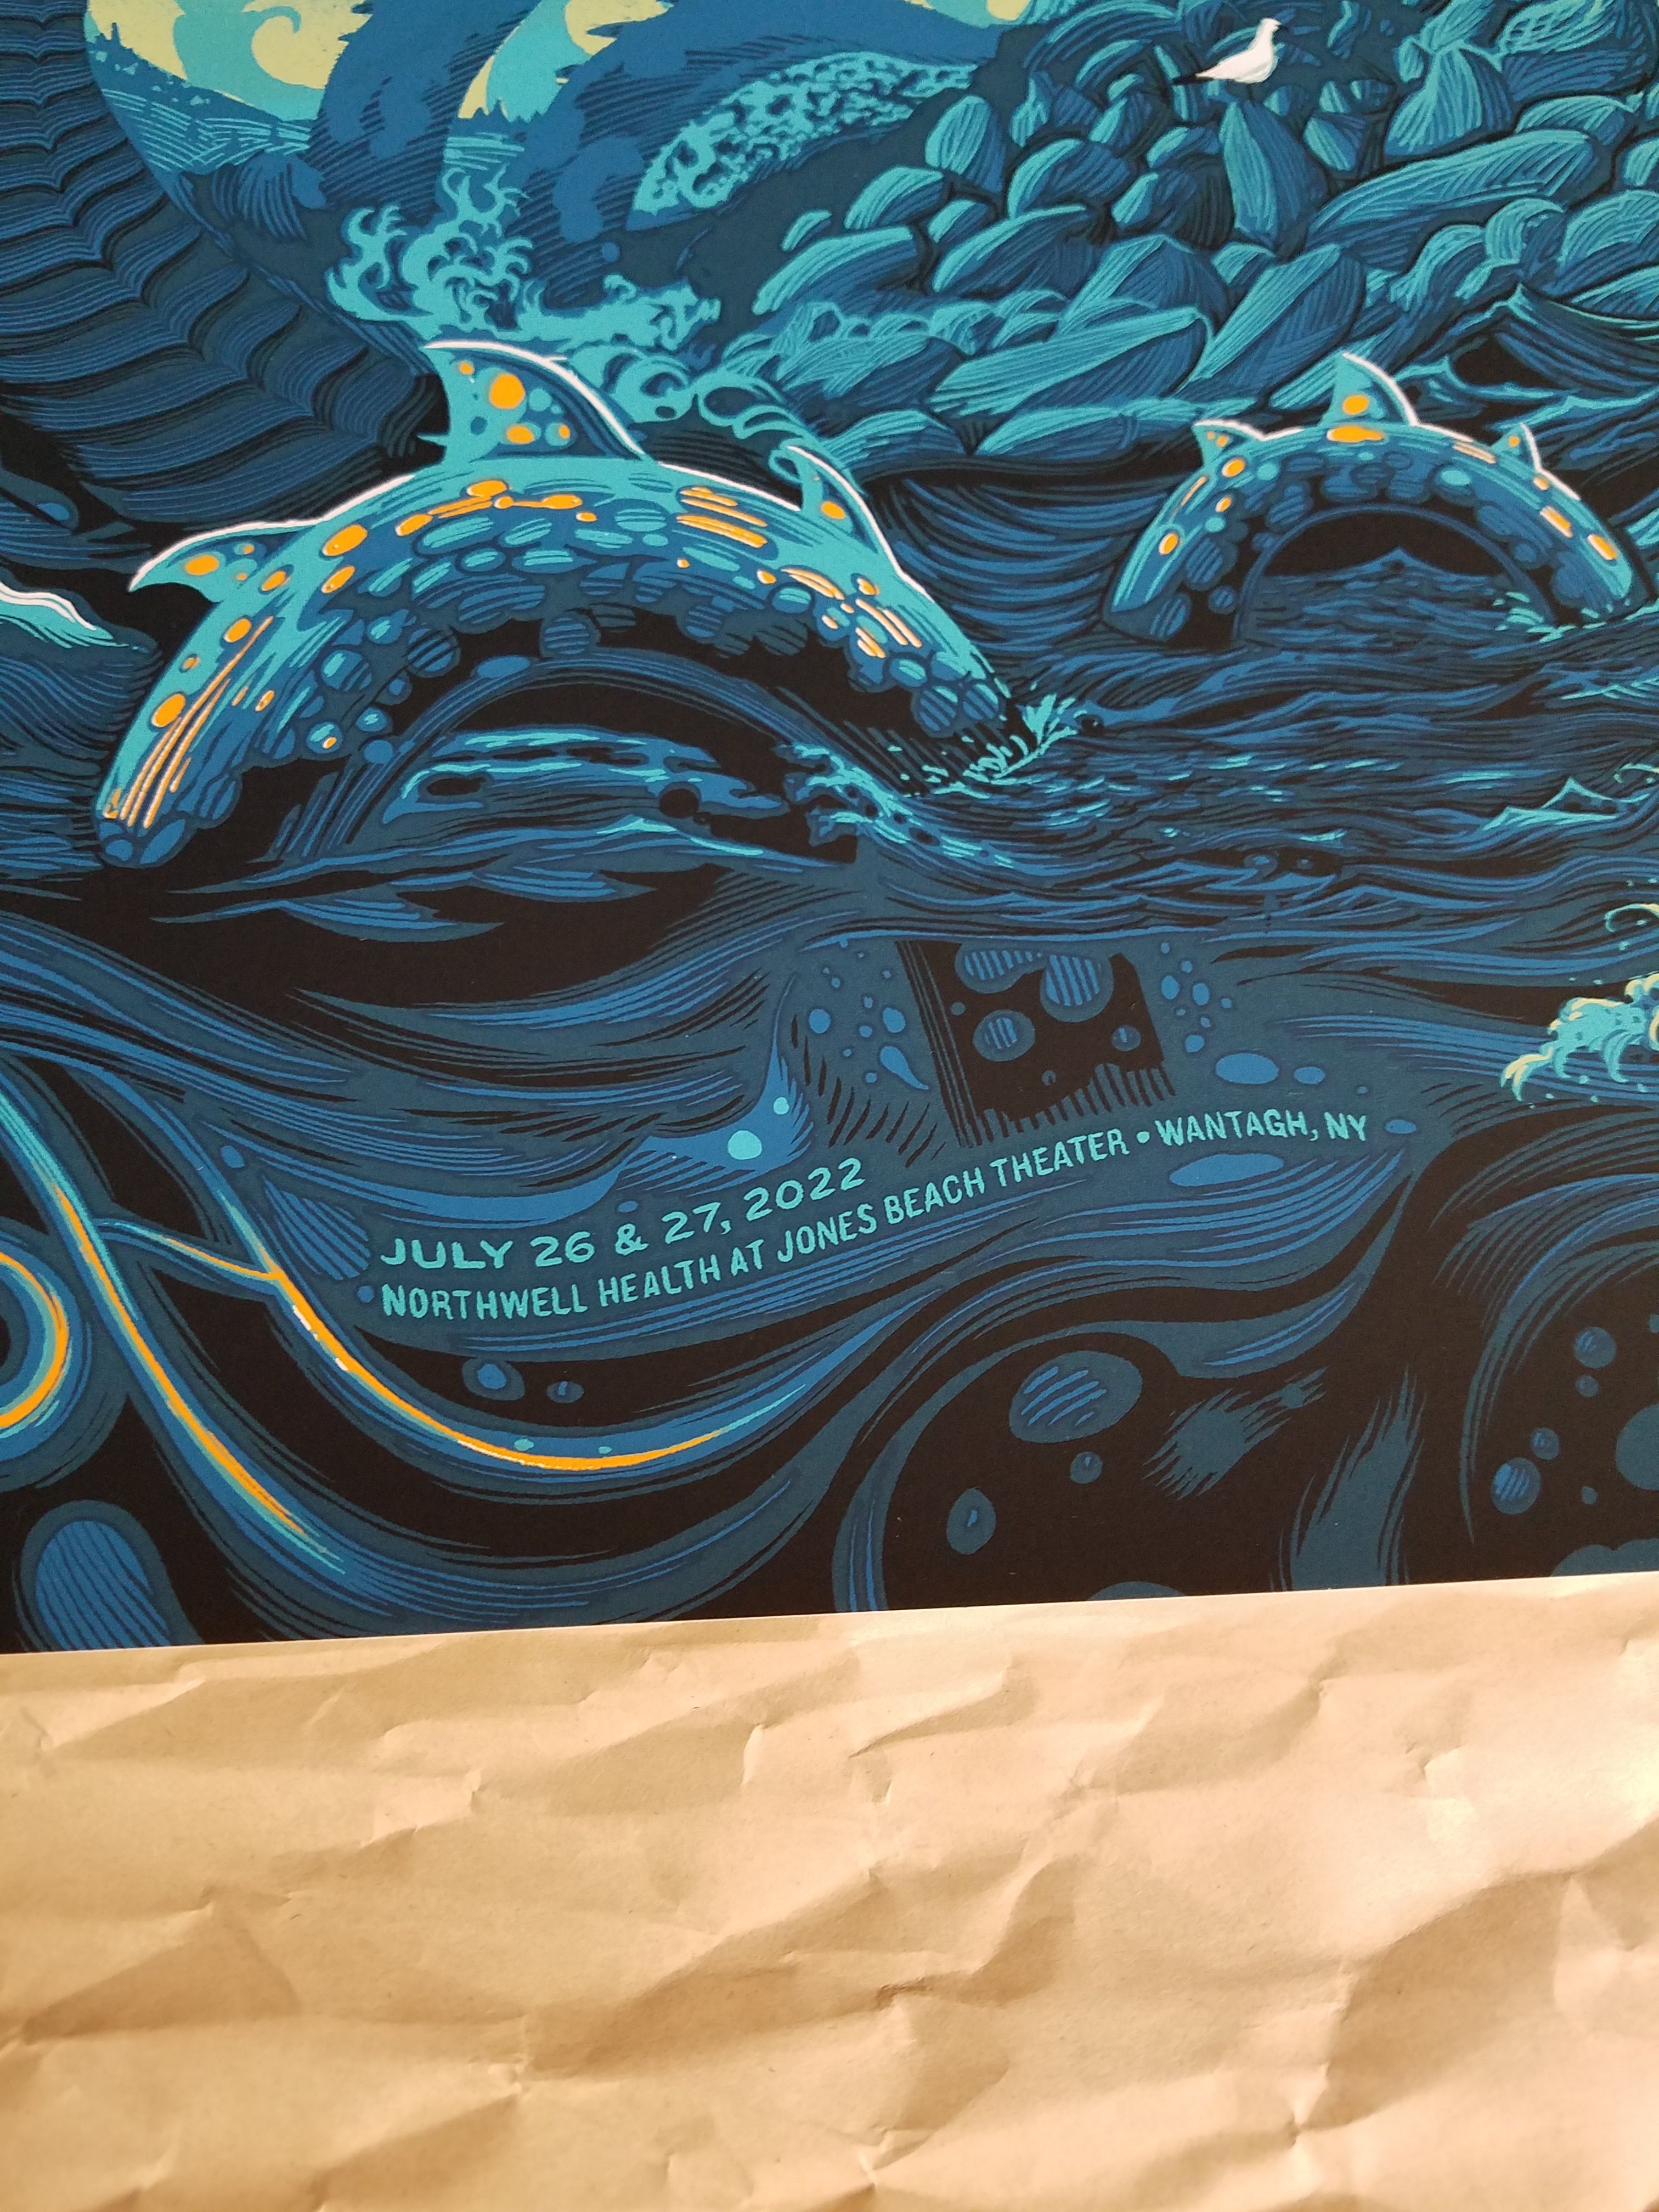 Title: Phish Jones Beach Poster - 2022  Artist: Paul Kreizenbeck  Edition:   x x/150  Type:  Screen Print  Size: 18" x 24"  Notes:  Print is stored flat in very good condition.  7 color print, signed and numbered by the artist.  Following purchase, print will be rolled in kraft paper and shipped in a sturdy cardboard tube which is padded on both ends with bubble wrap.